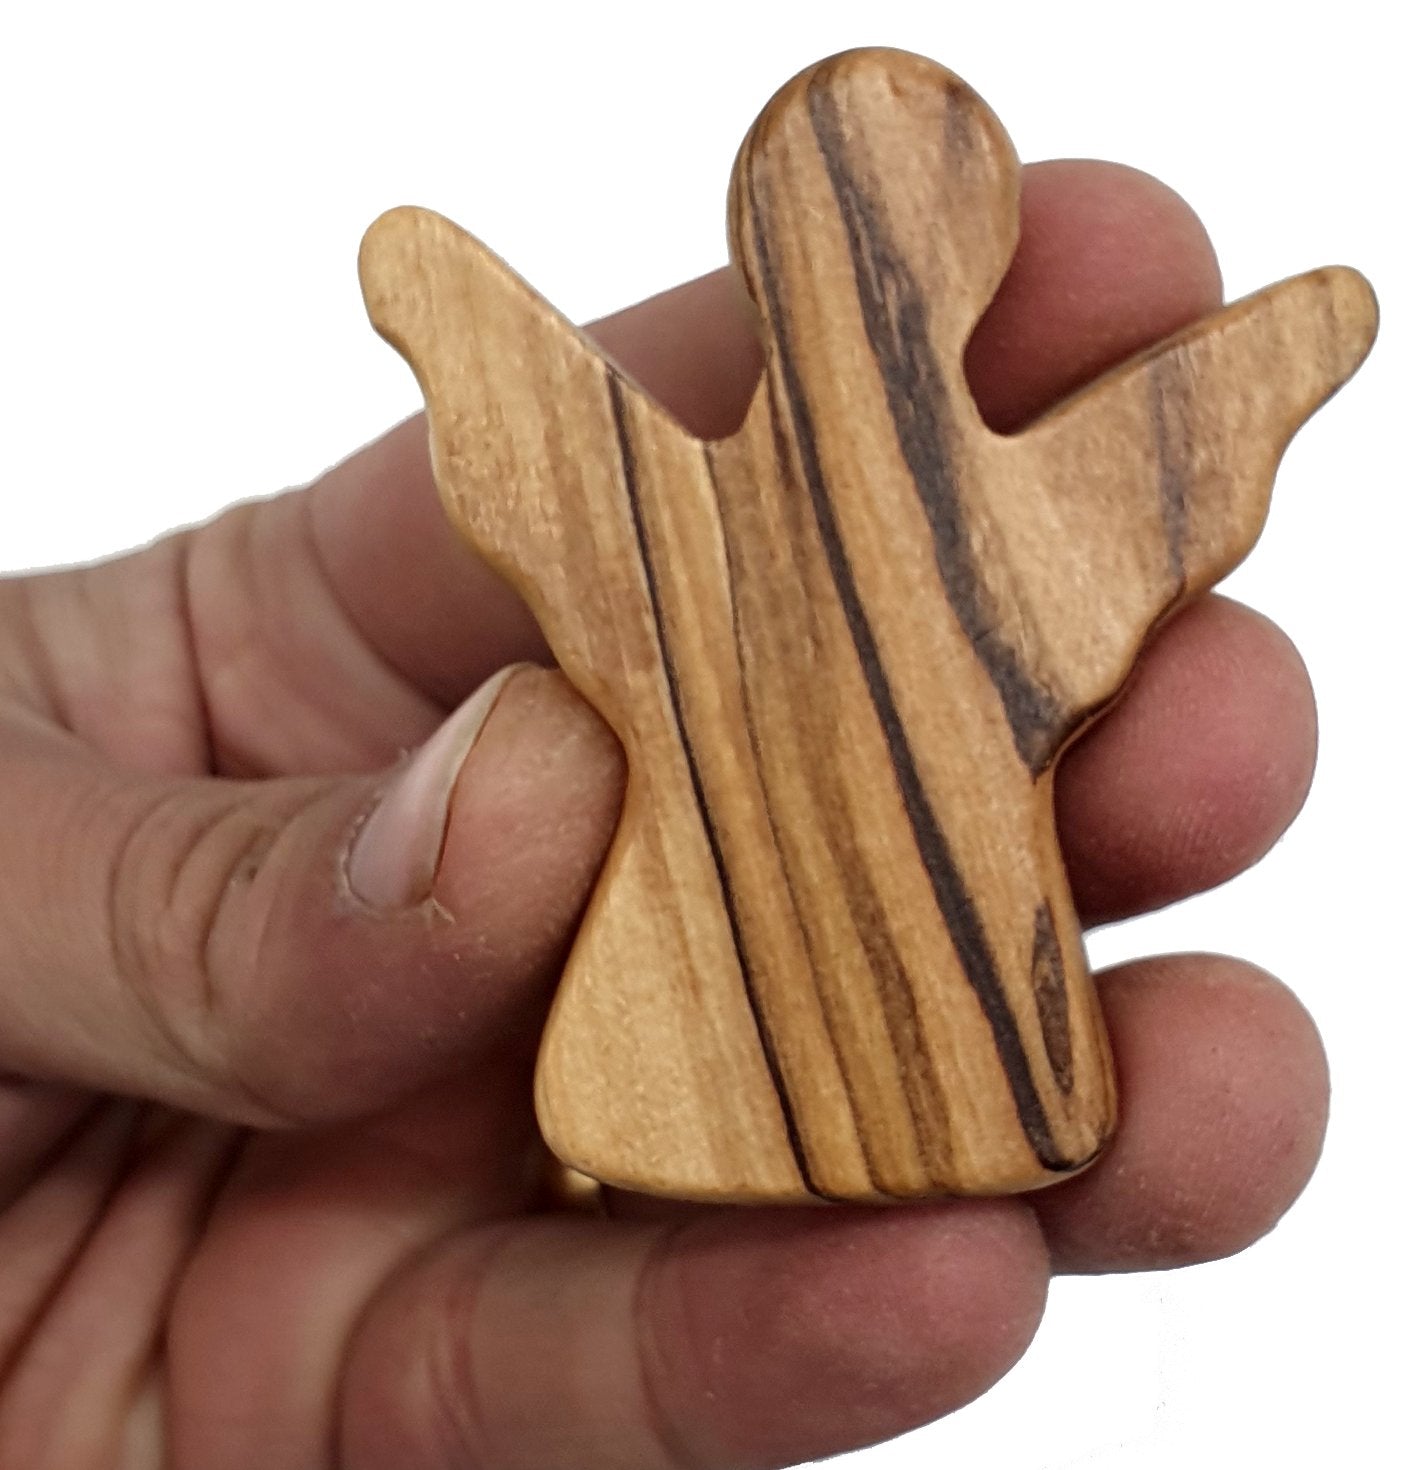 Zuluf Handheld Olive Wood Guardian Angel Figurine - Comfort and Blessings for Stress, Worry, and Anxiety - Perfect Baptismal, Newborn, Birthday, Gender Reveal, Adult, and Senior Gifts, New Favor - Zuluf